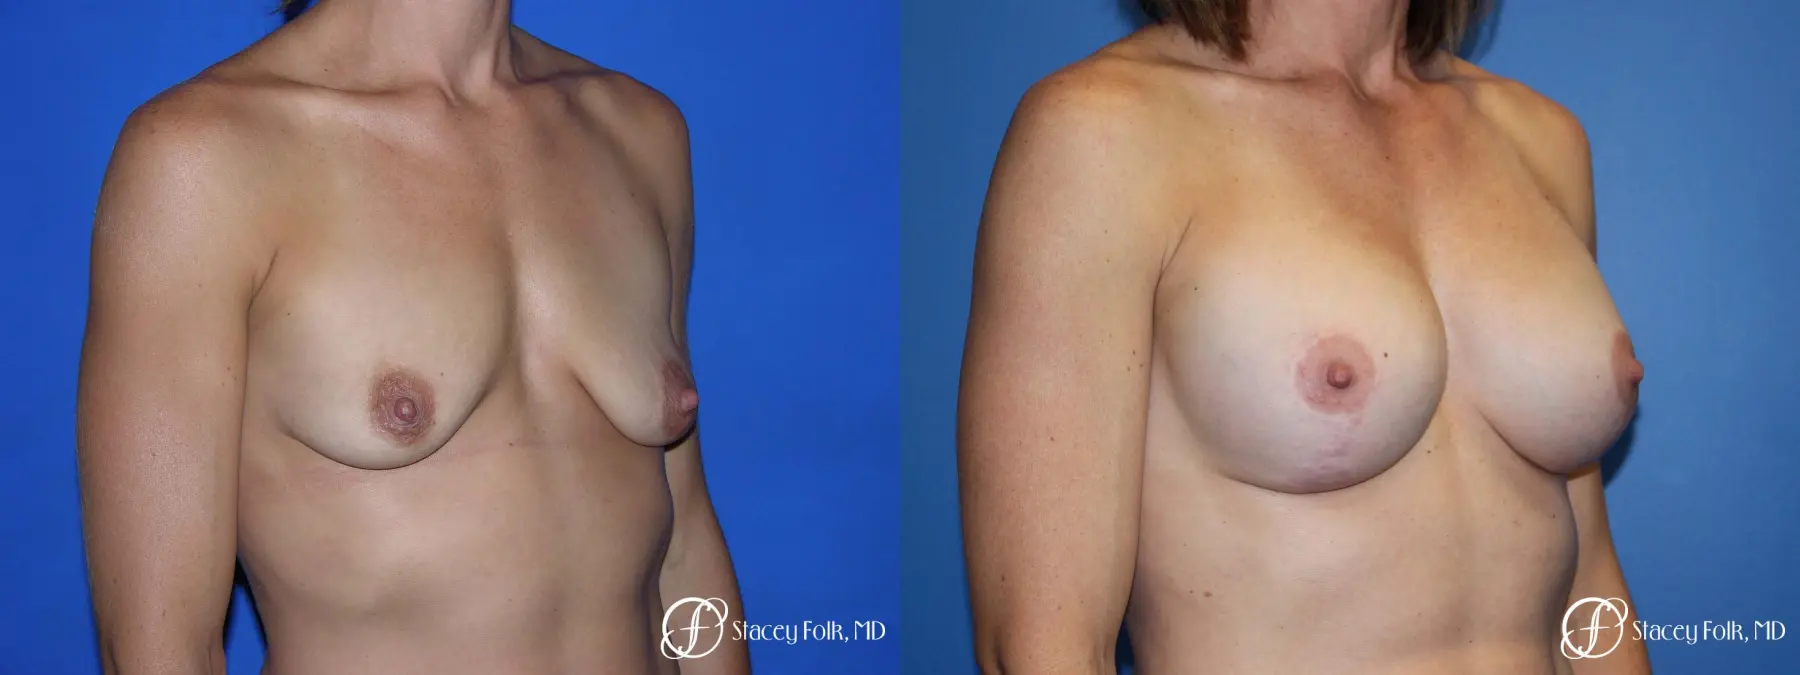 Denver Breast augmentation and breast lift (Mastopexy) 10091 - Before and After 2